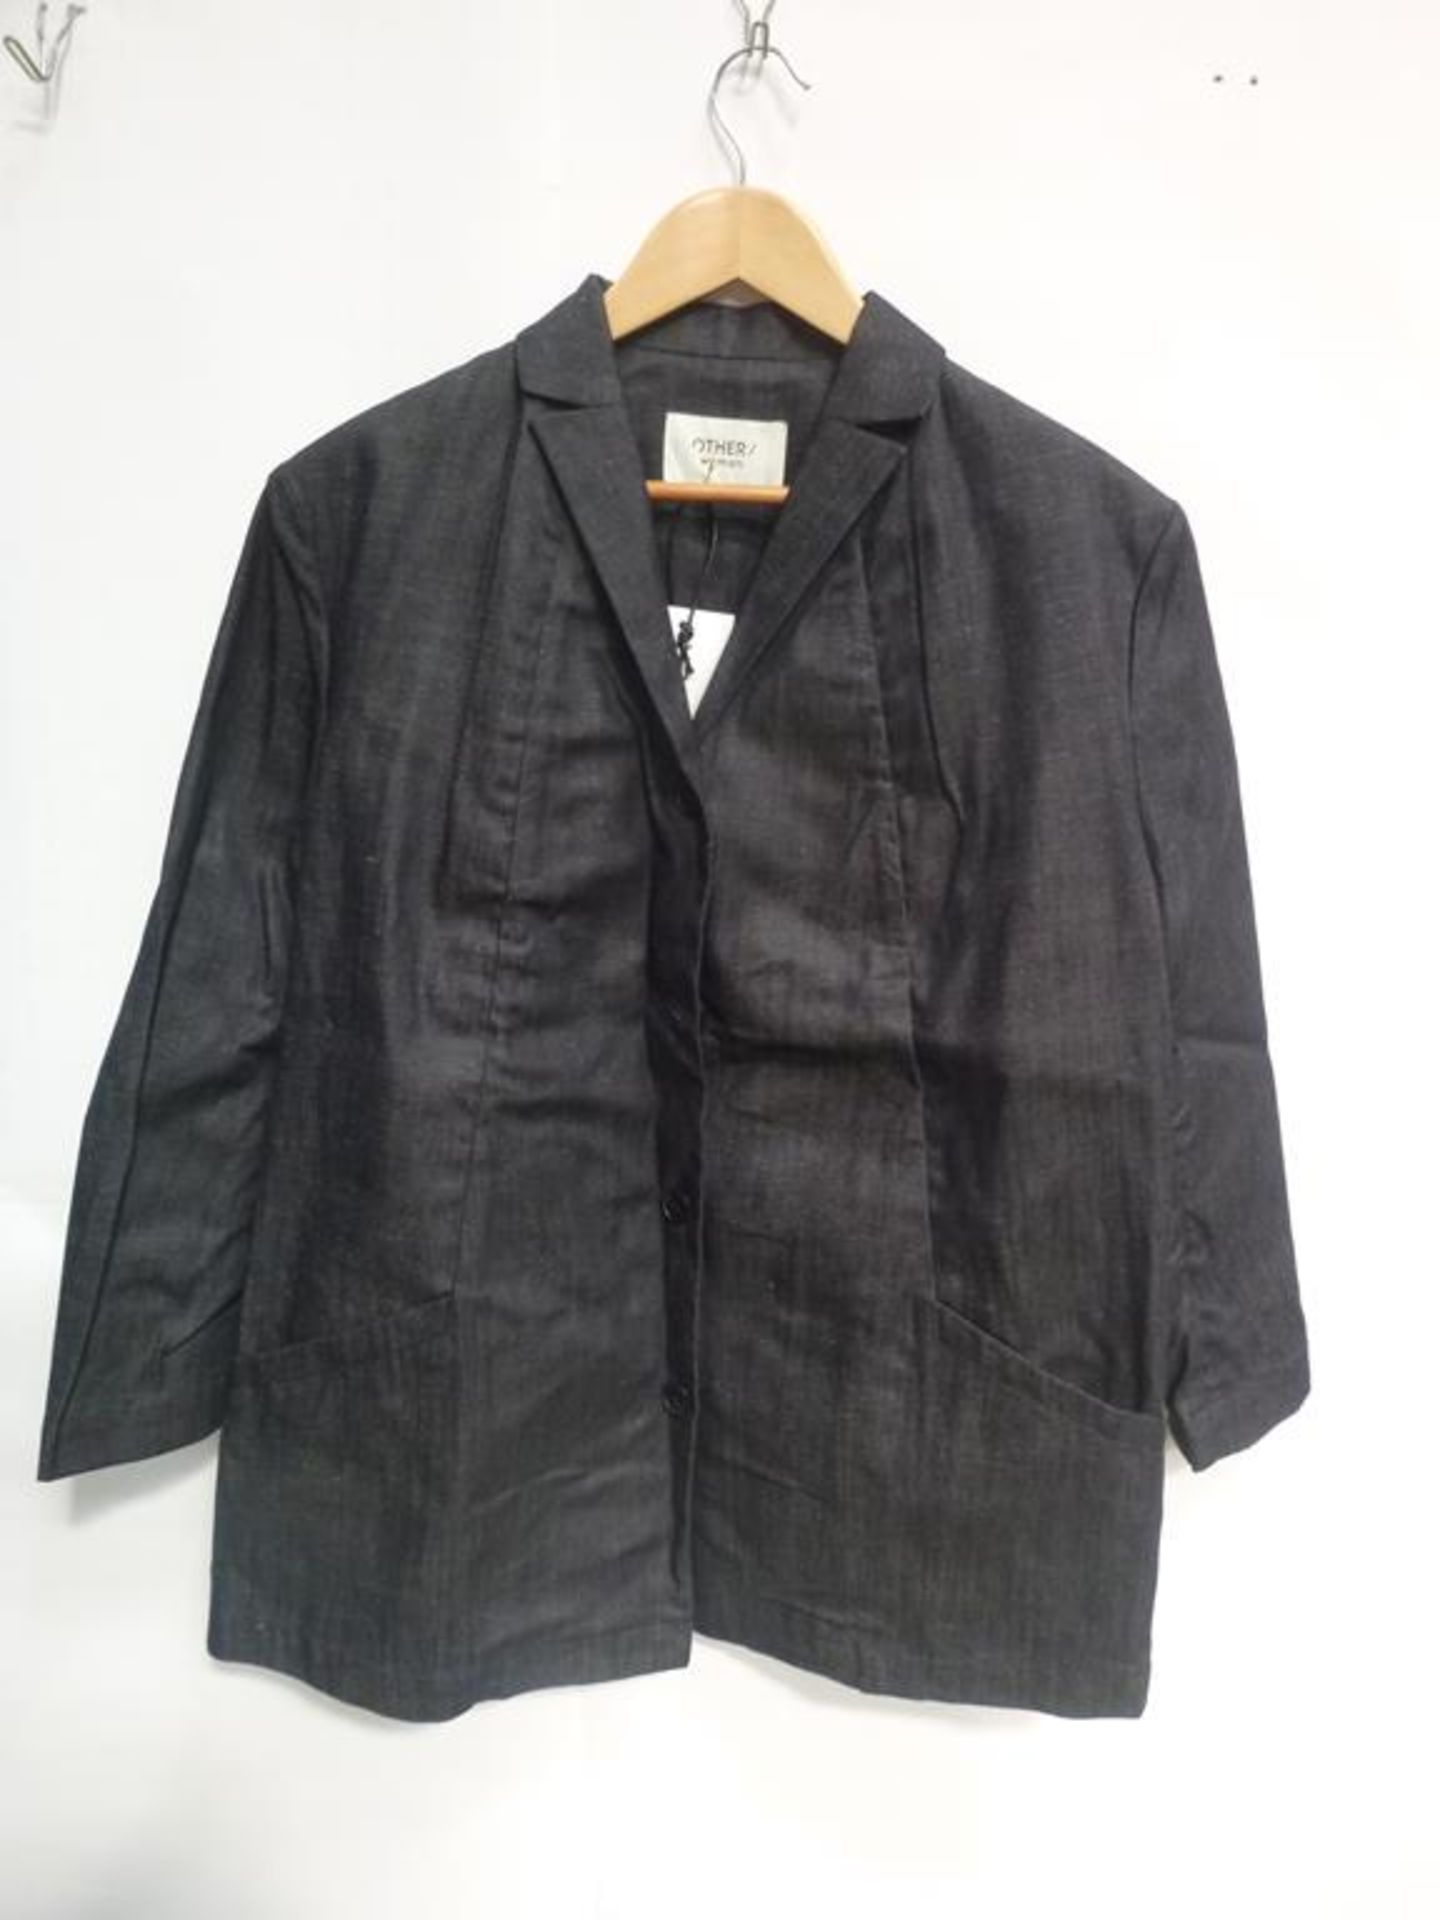 Two Dark Ladies Blazers/Jackets (M, L), Lemaire Plastron Long Sleeve Denim Top (42), Black and White - Image 4 of 4